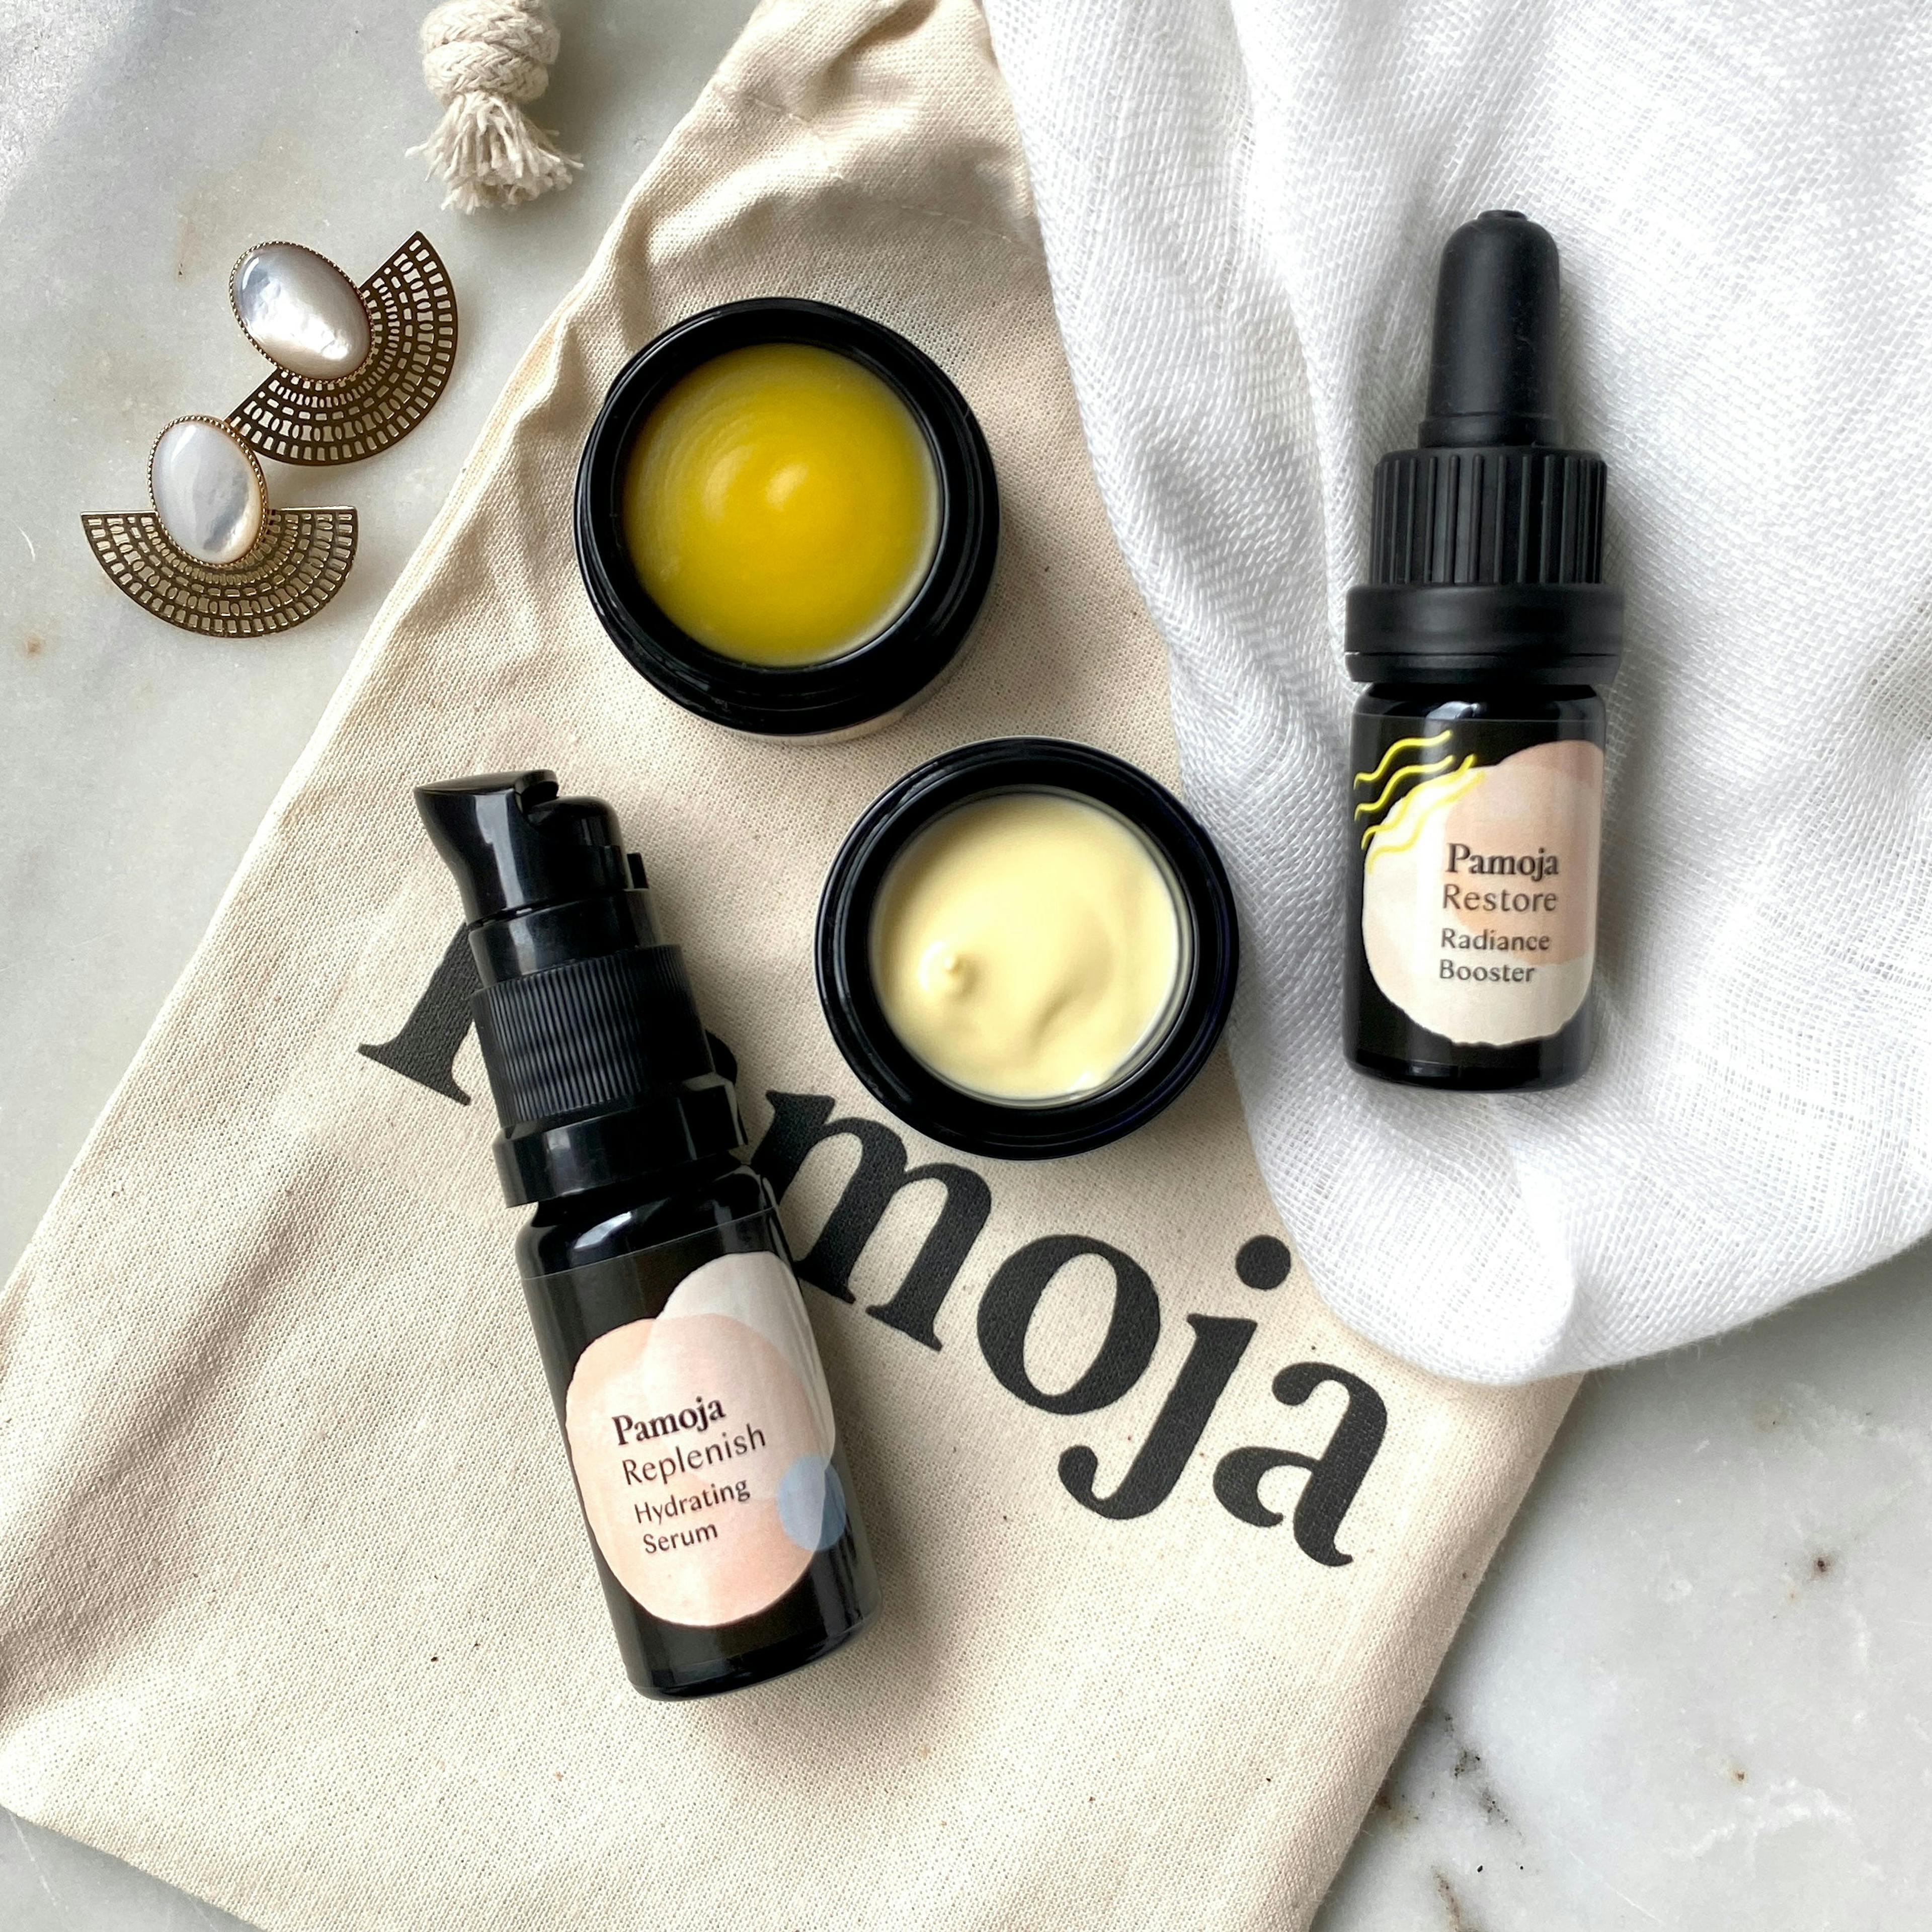 The Mini Experience Set | Cleaning Balm, Beauty Oil, Face Cream, Organic Cloth